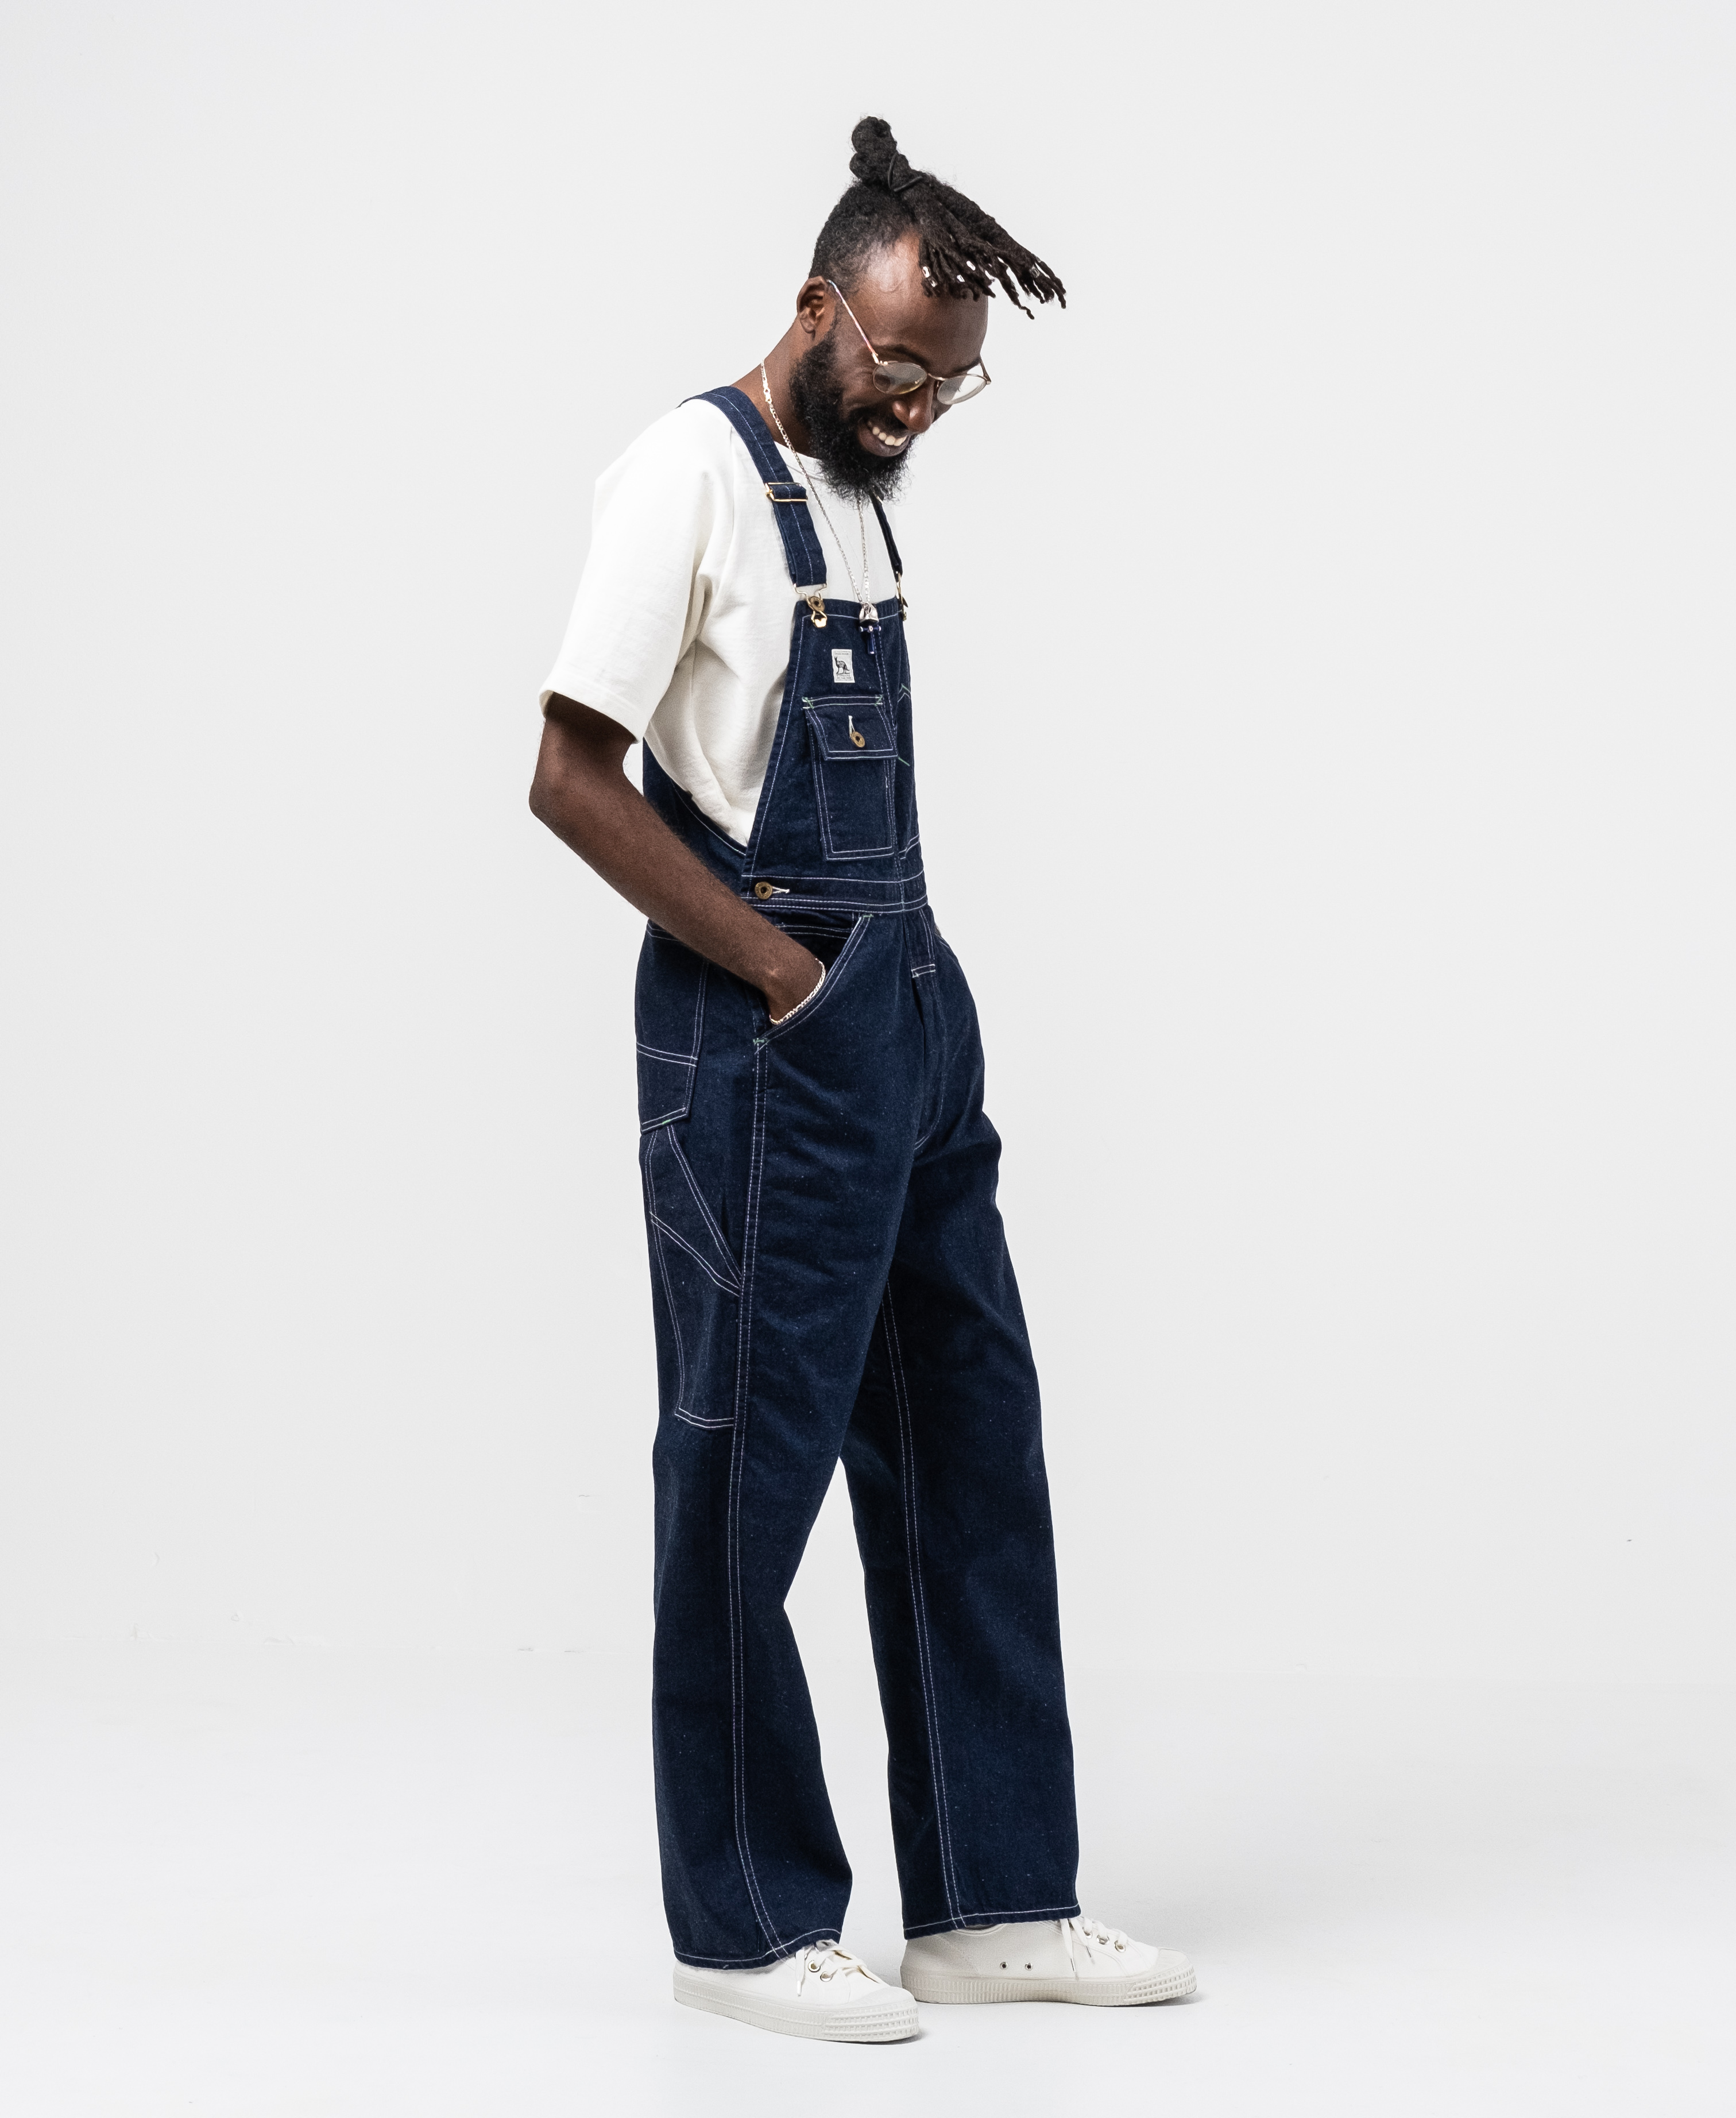 TCB - Black Cat Overall - Meadow